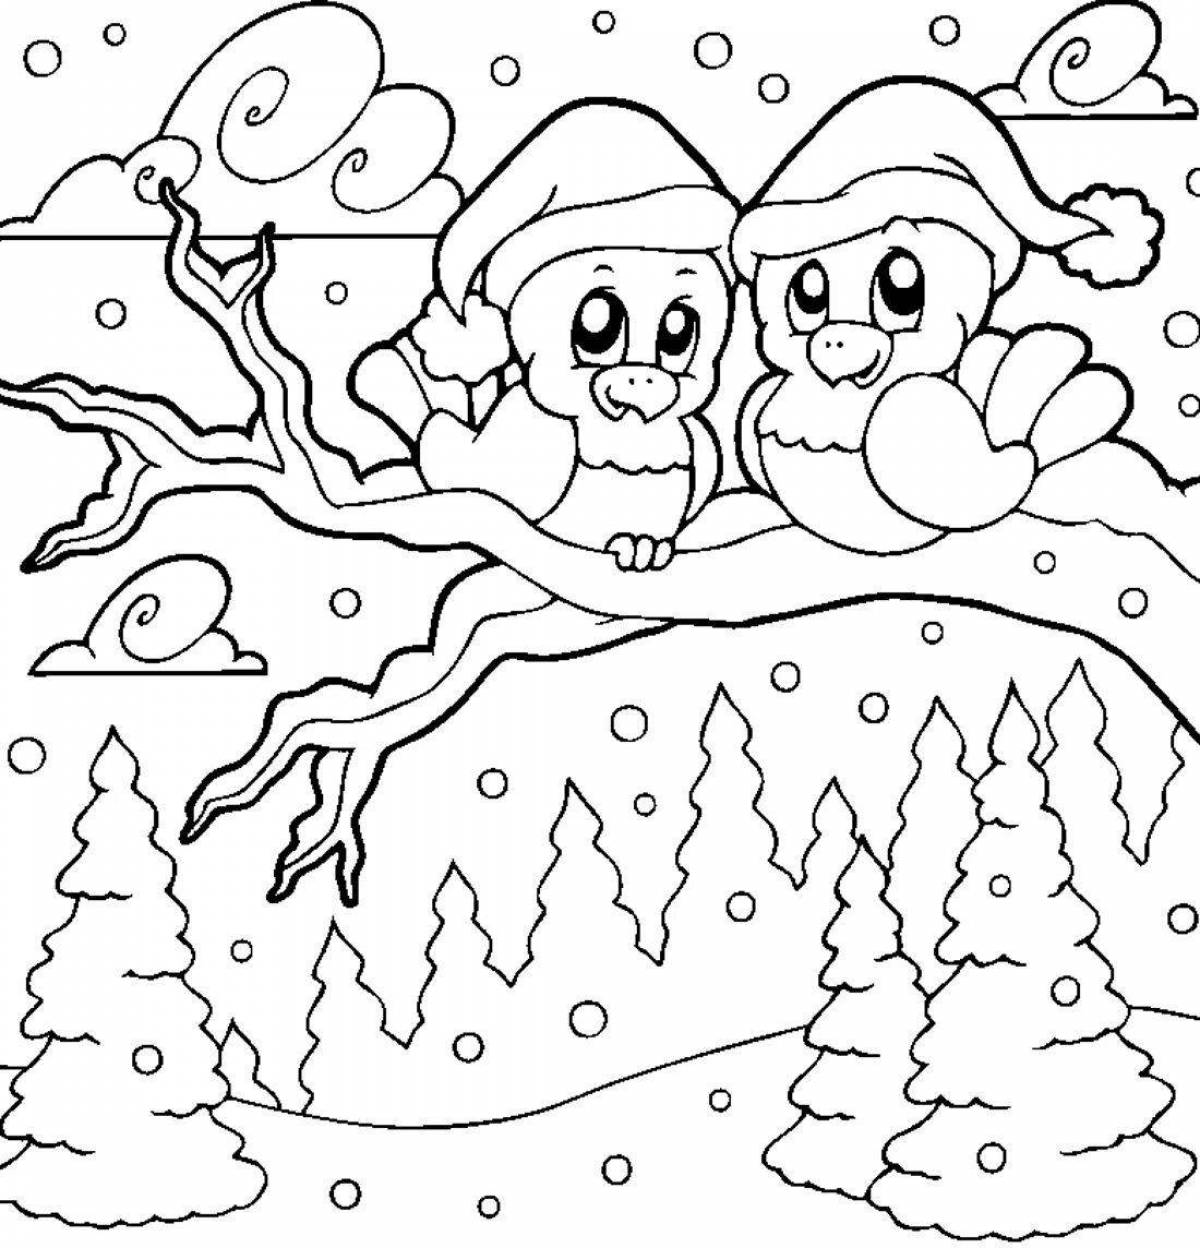 Luxury winter beauty coloring book